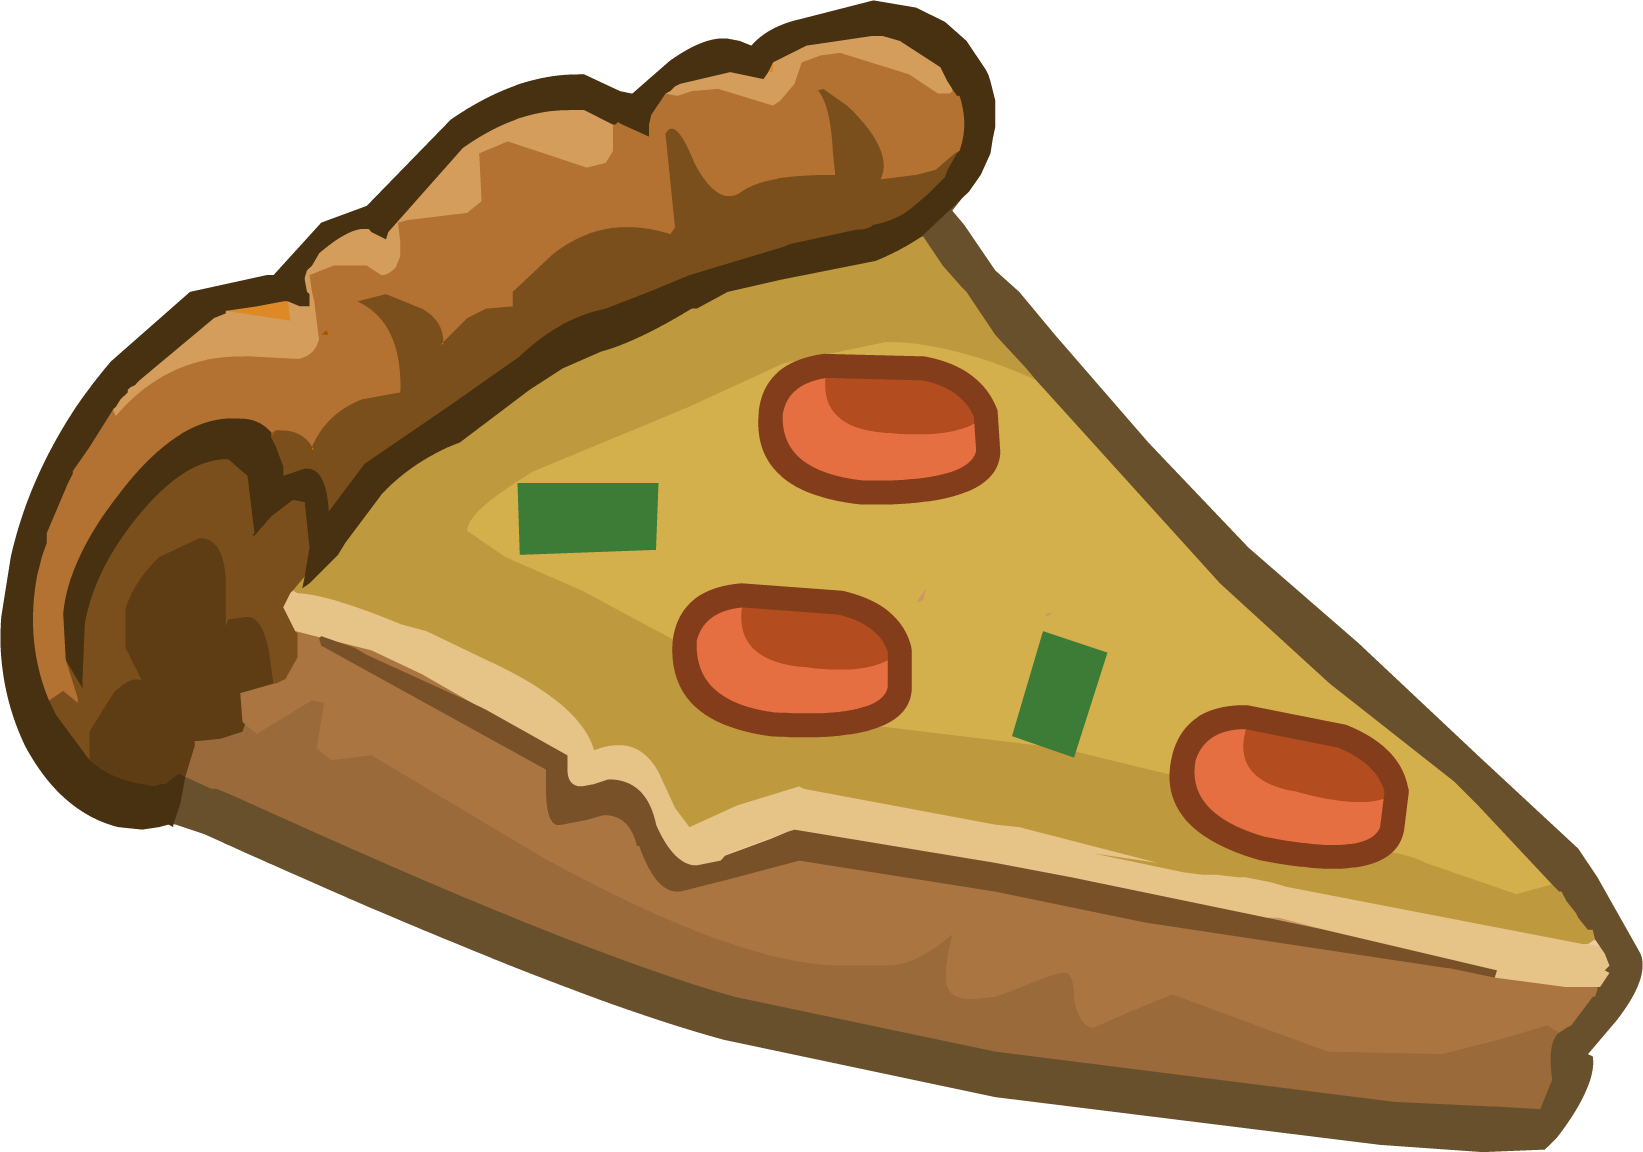 Foods clipart snack. Pizza club penguin wiki